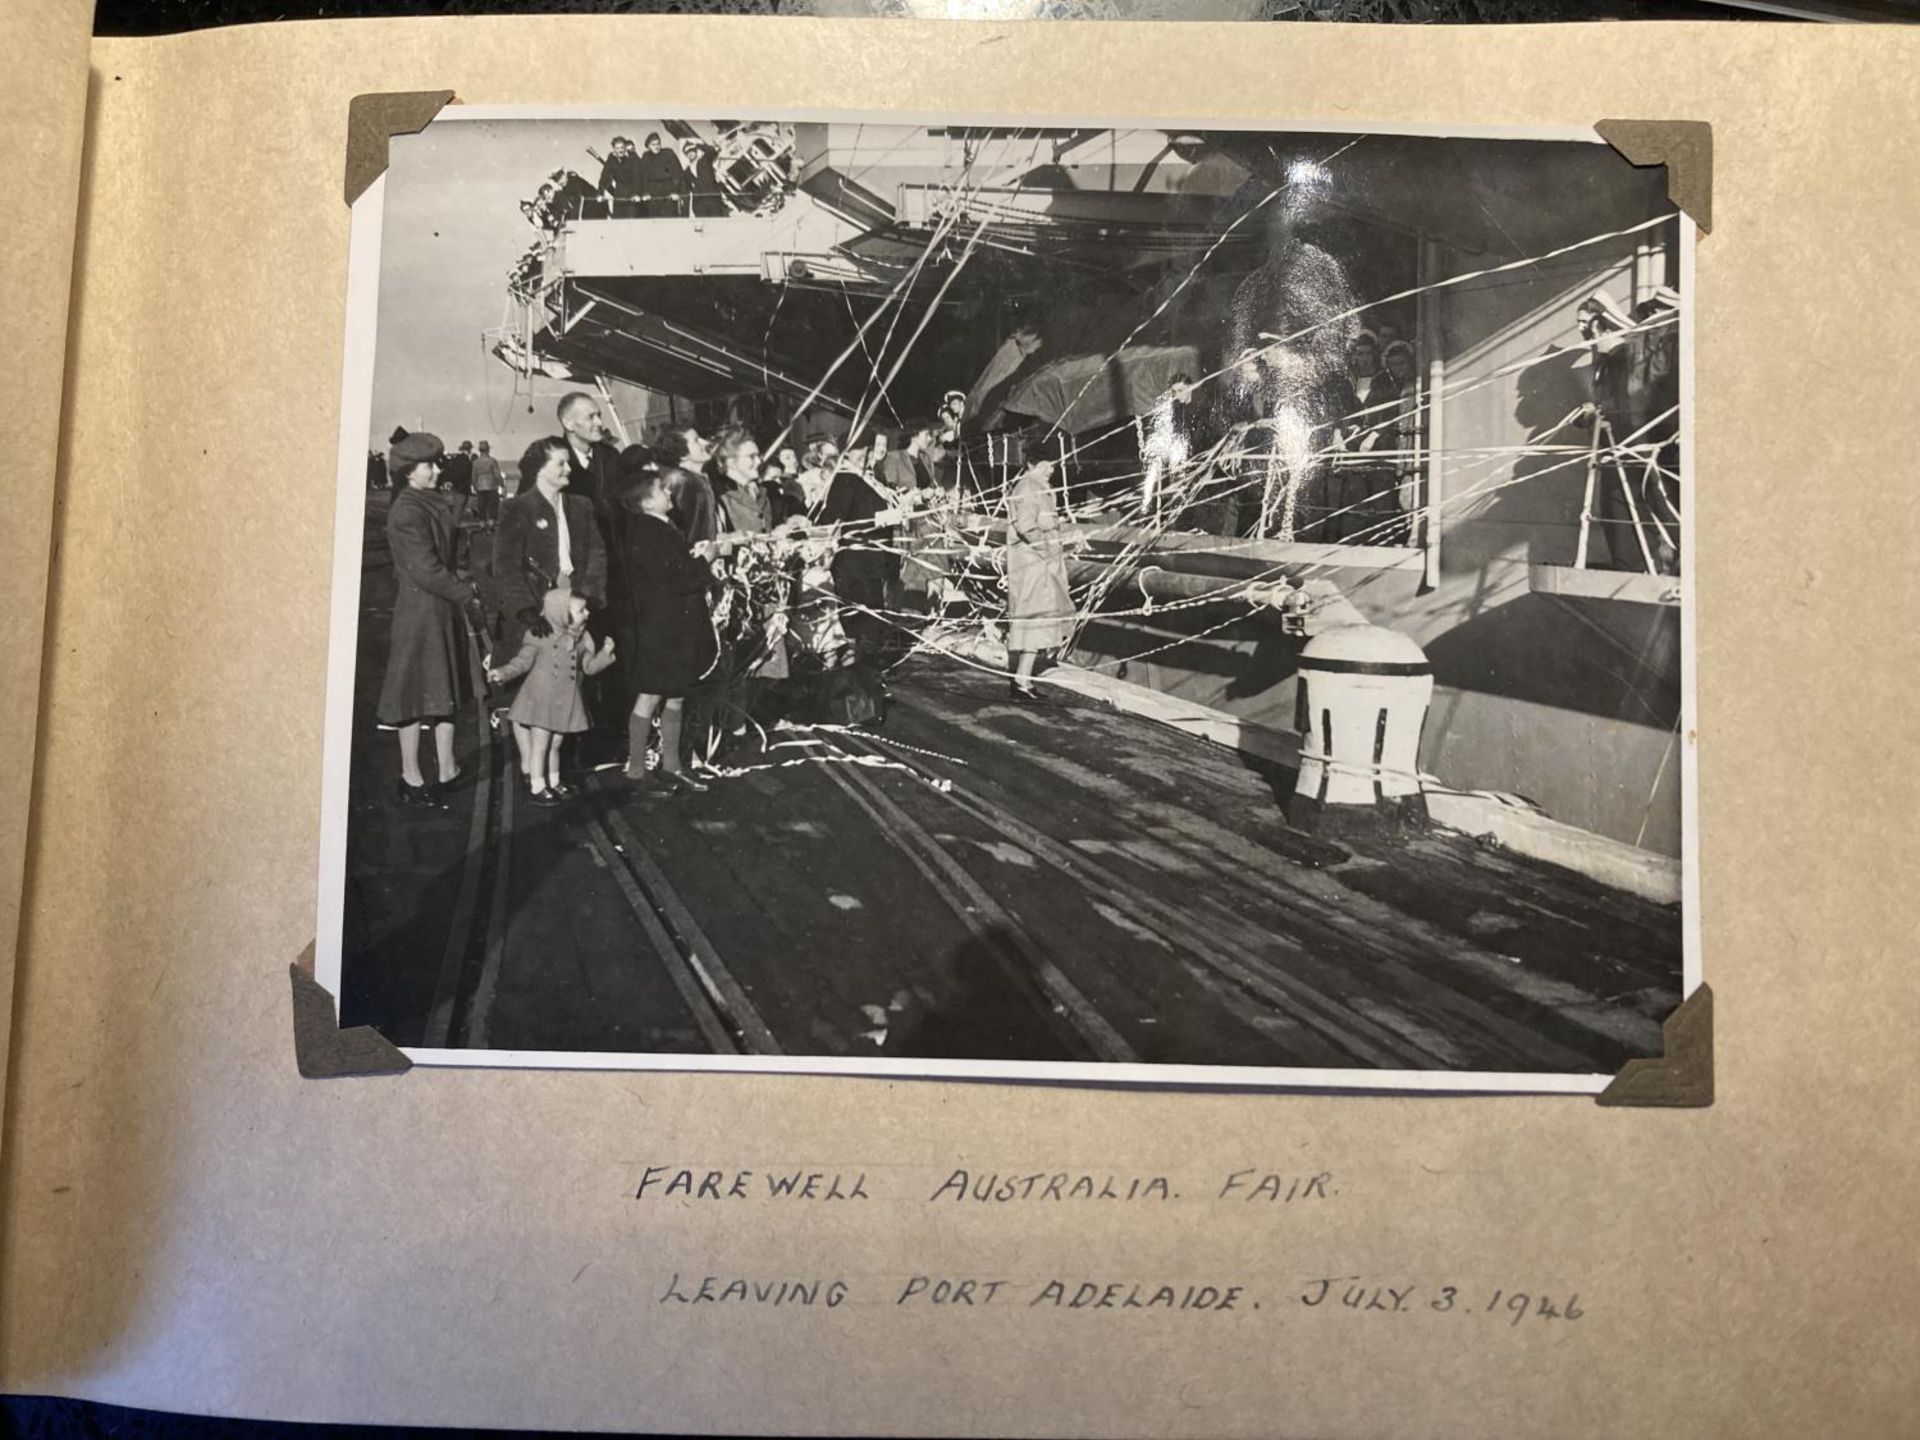 A WORLD WAR II PHOTOGRAPH ALBUM CONTAINING PHOTOGRAPHS OF THE JAPANESE SIGNING OF THE INSTRUMENT - Image 8 of 10